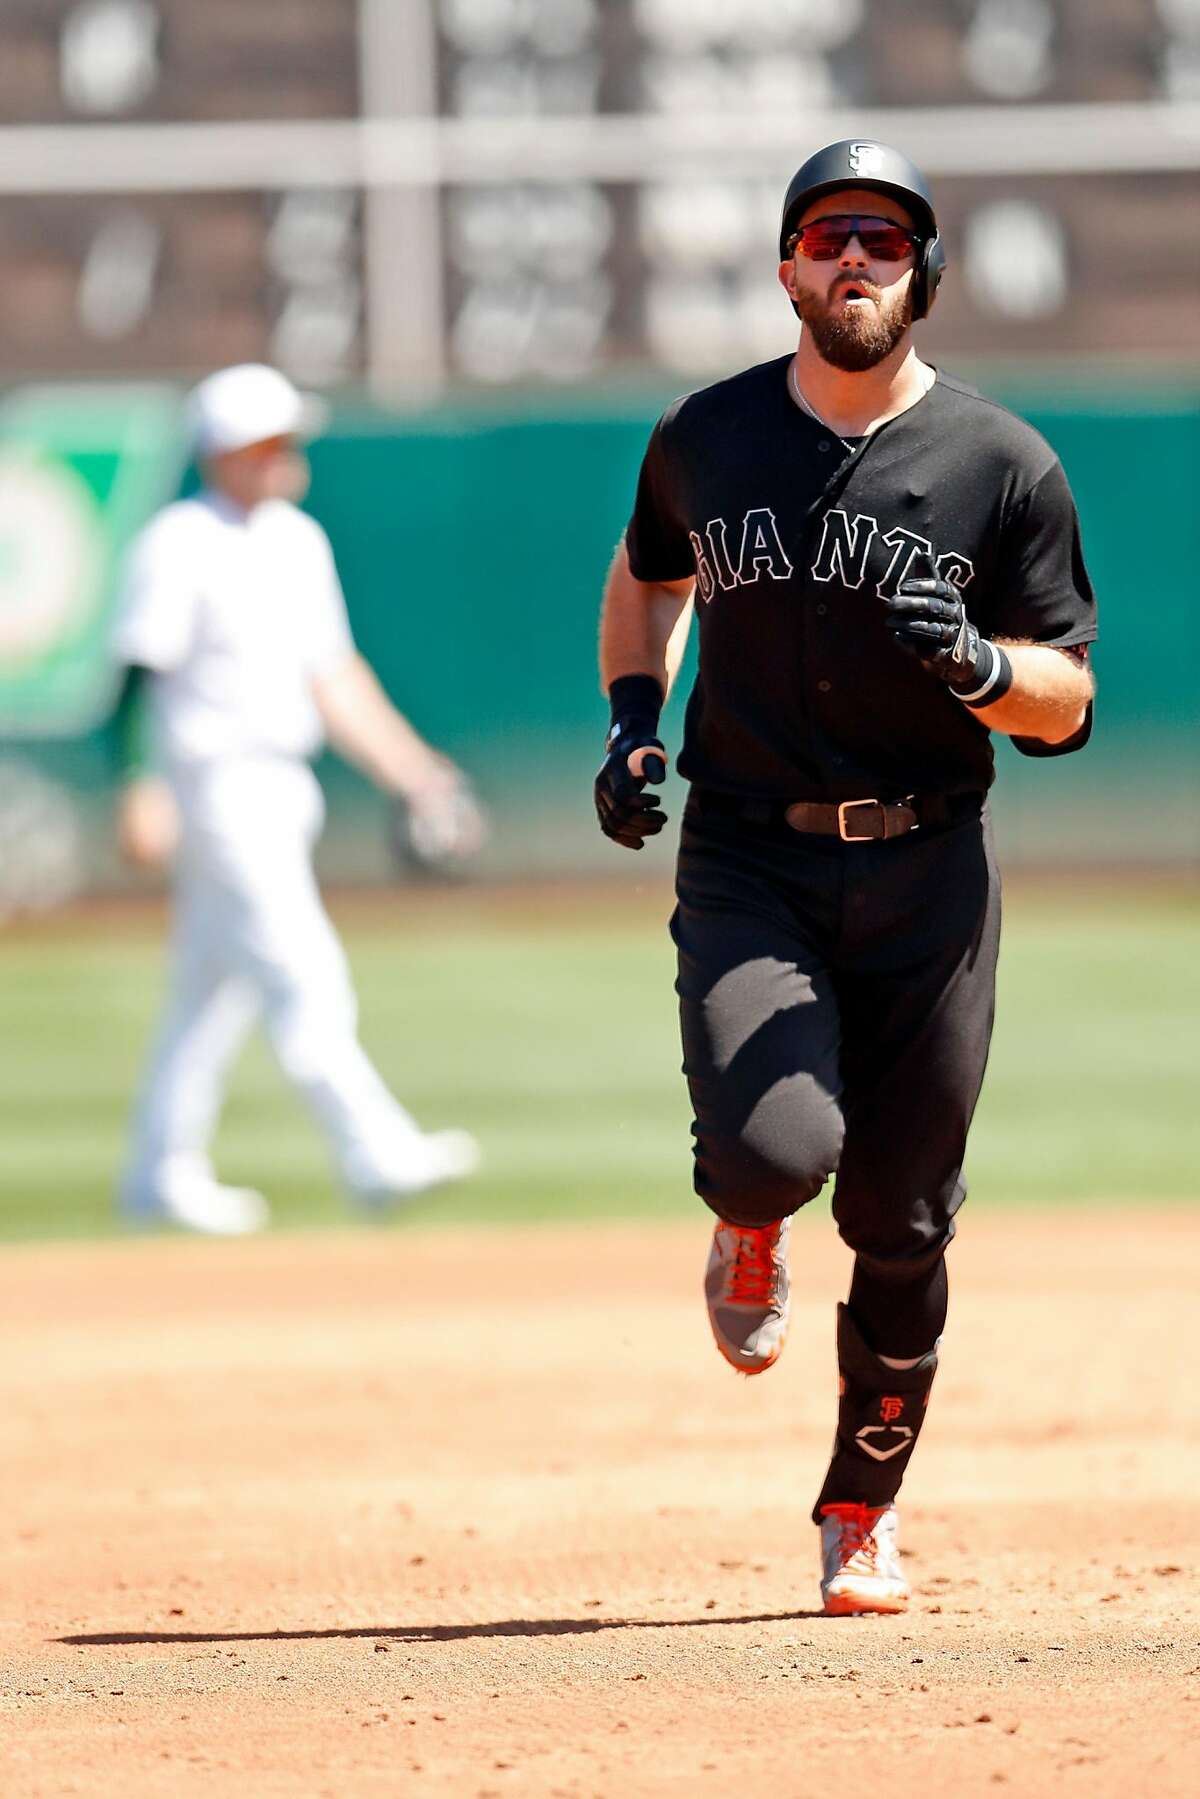 San Francisco Giants' Evan Longoria rounds the bases after solo home run in 3rd inning during MLB game at Oakland Coliseum in Oakland, Calif., on Sunday, August 25, 2019.